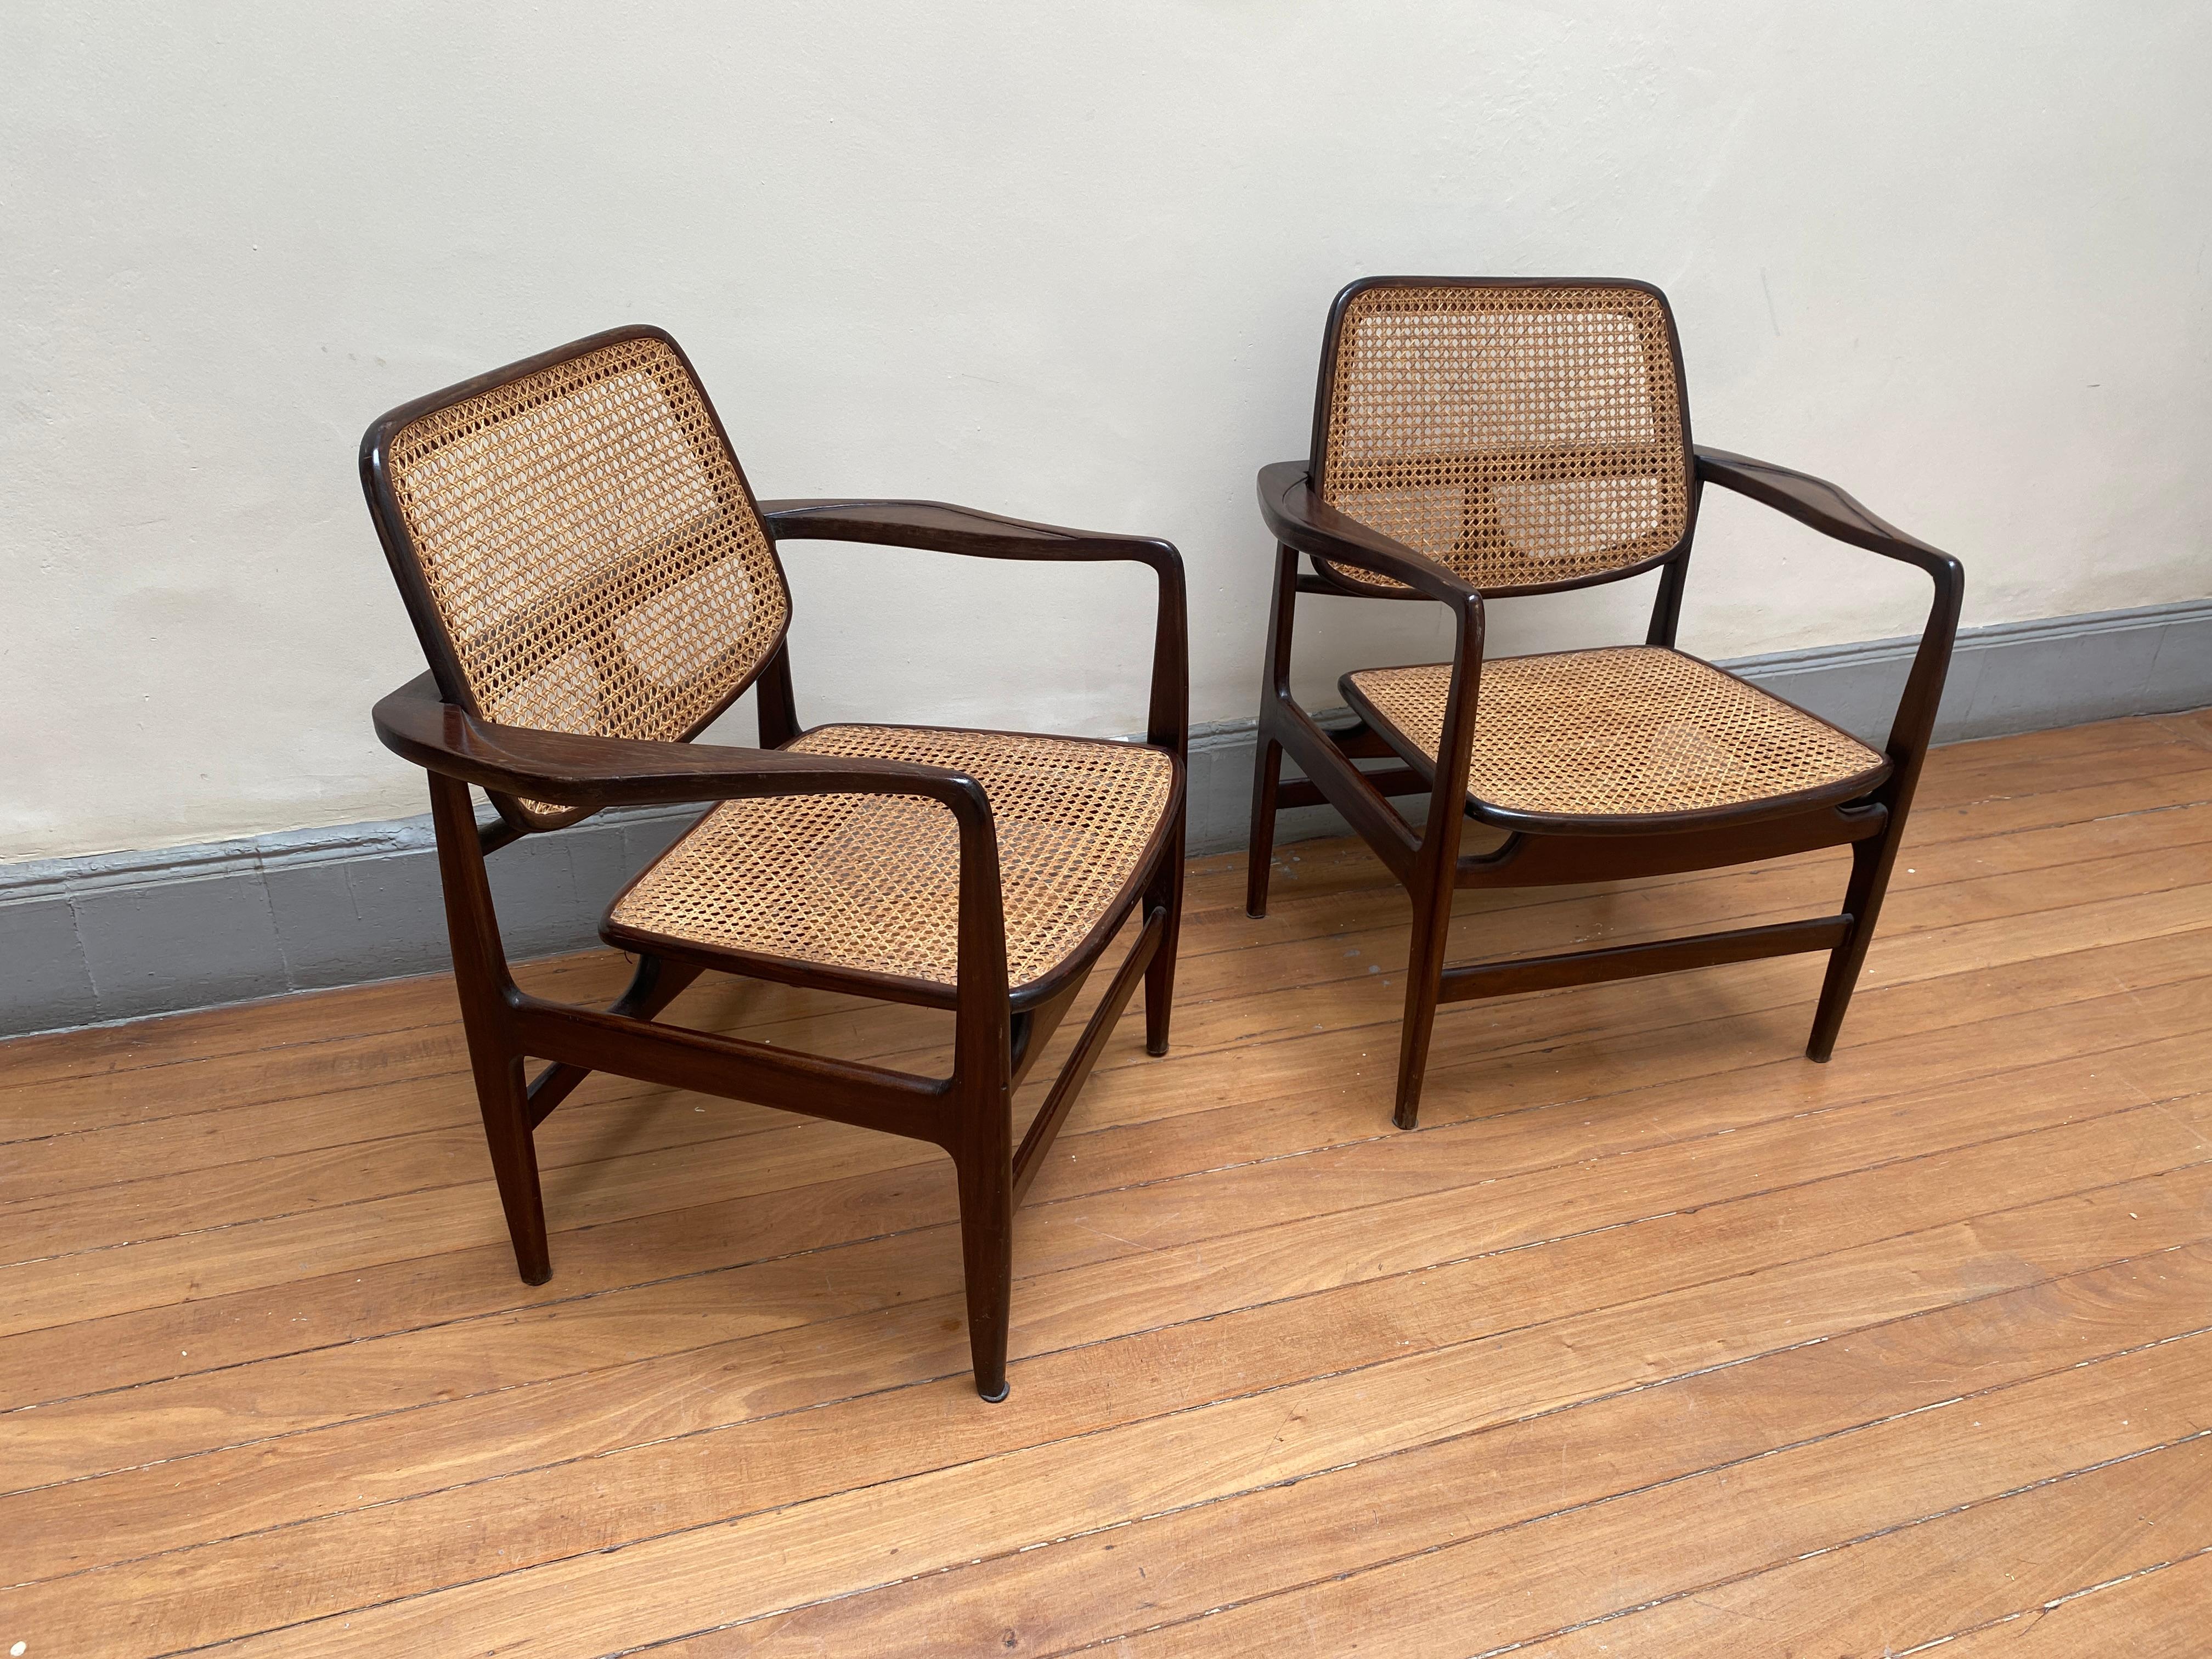 Brazilian Set of Two Mid-Century Modern Oscar Armchairs by Sergio Rodrigues, Brazil, 1956 For Sale